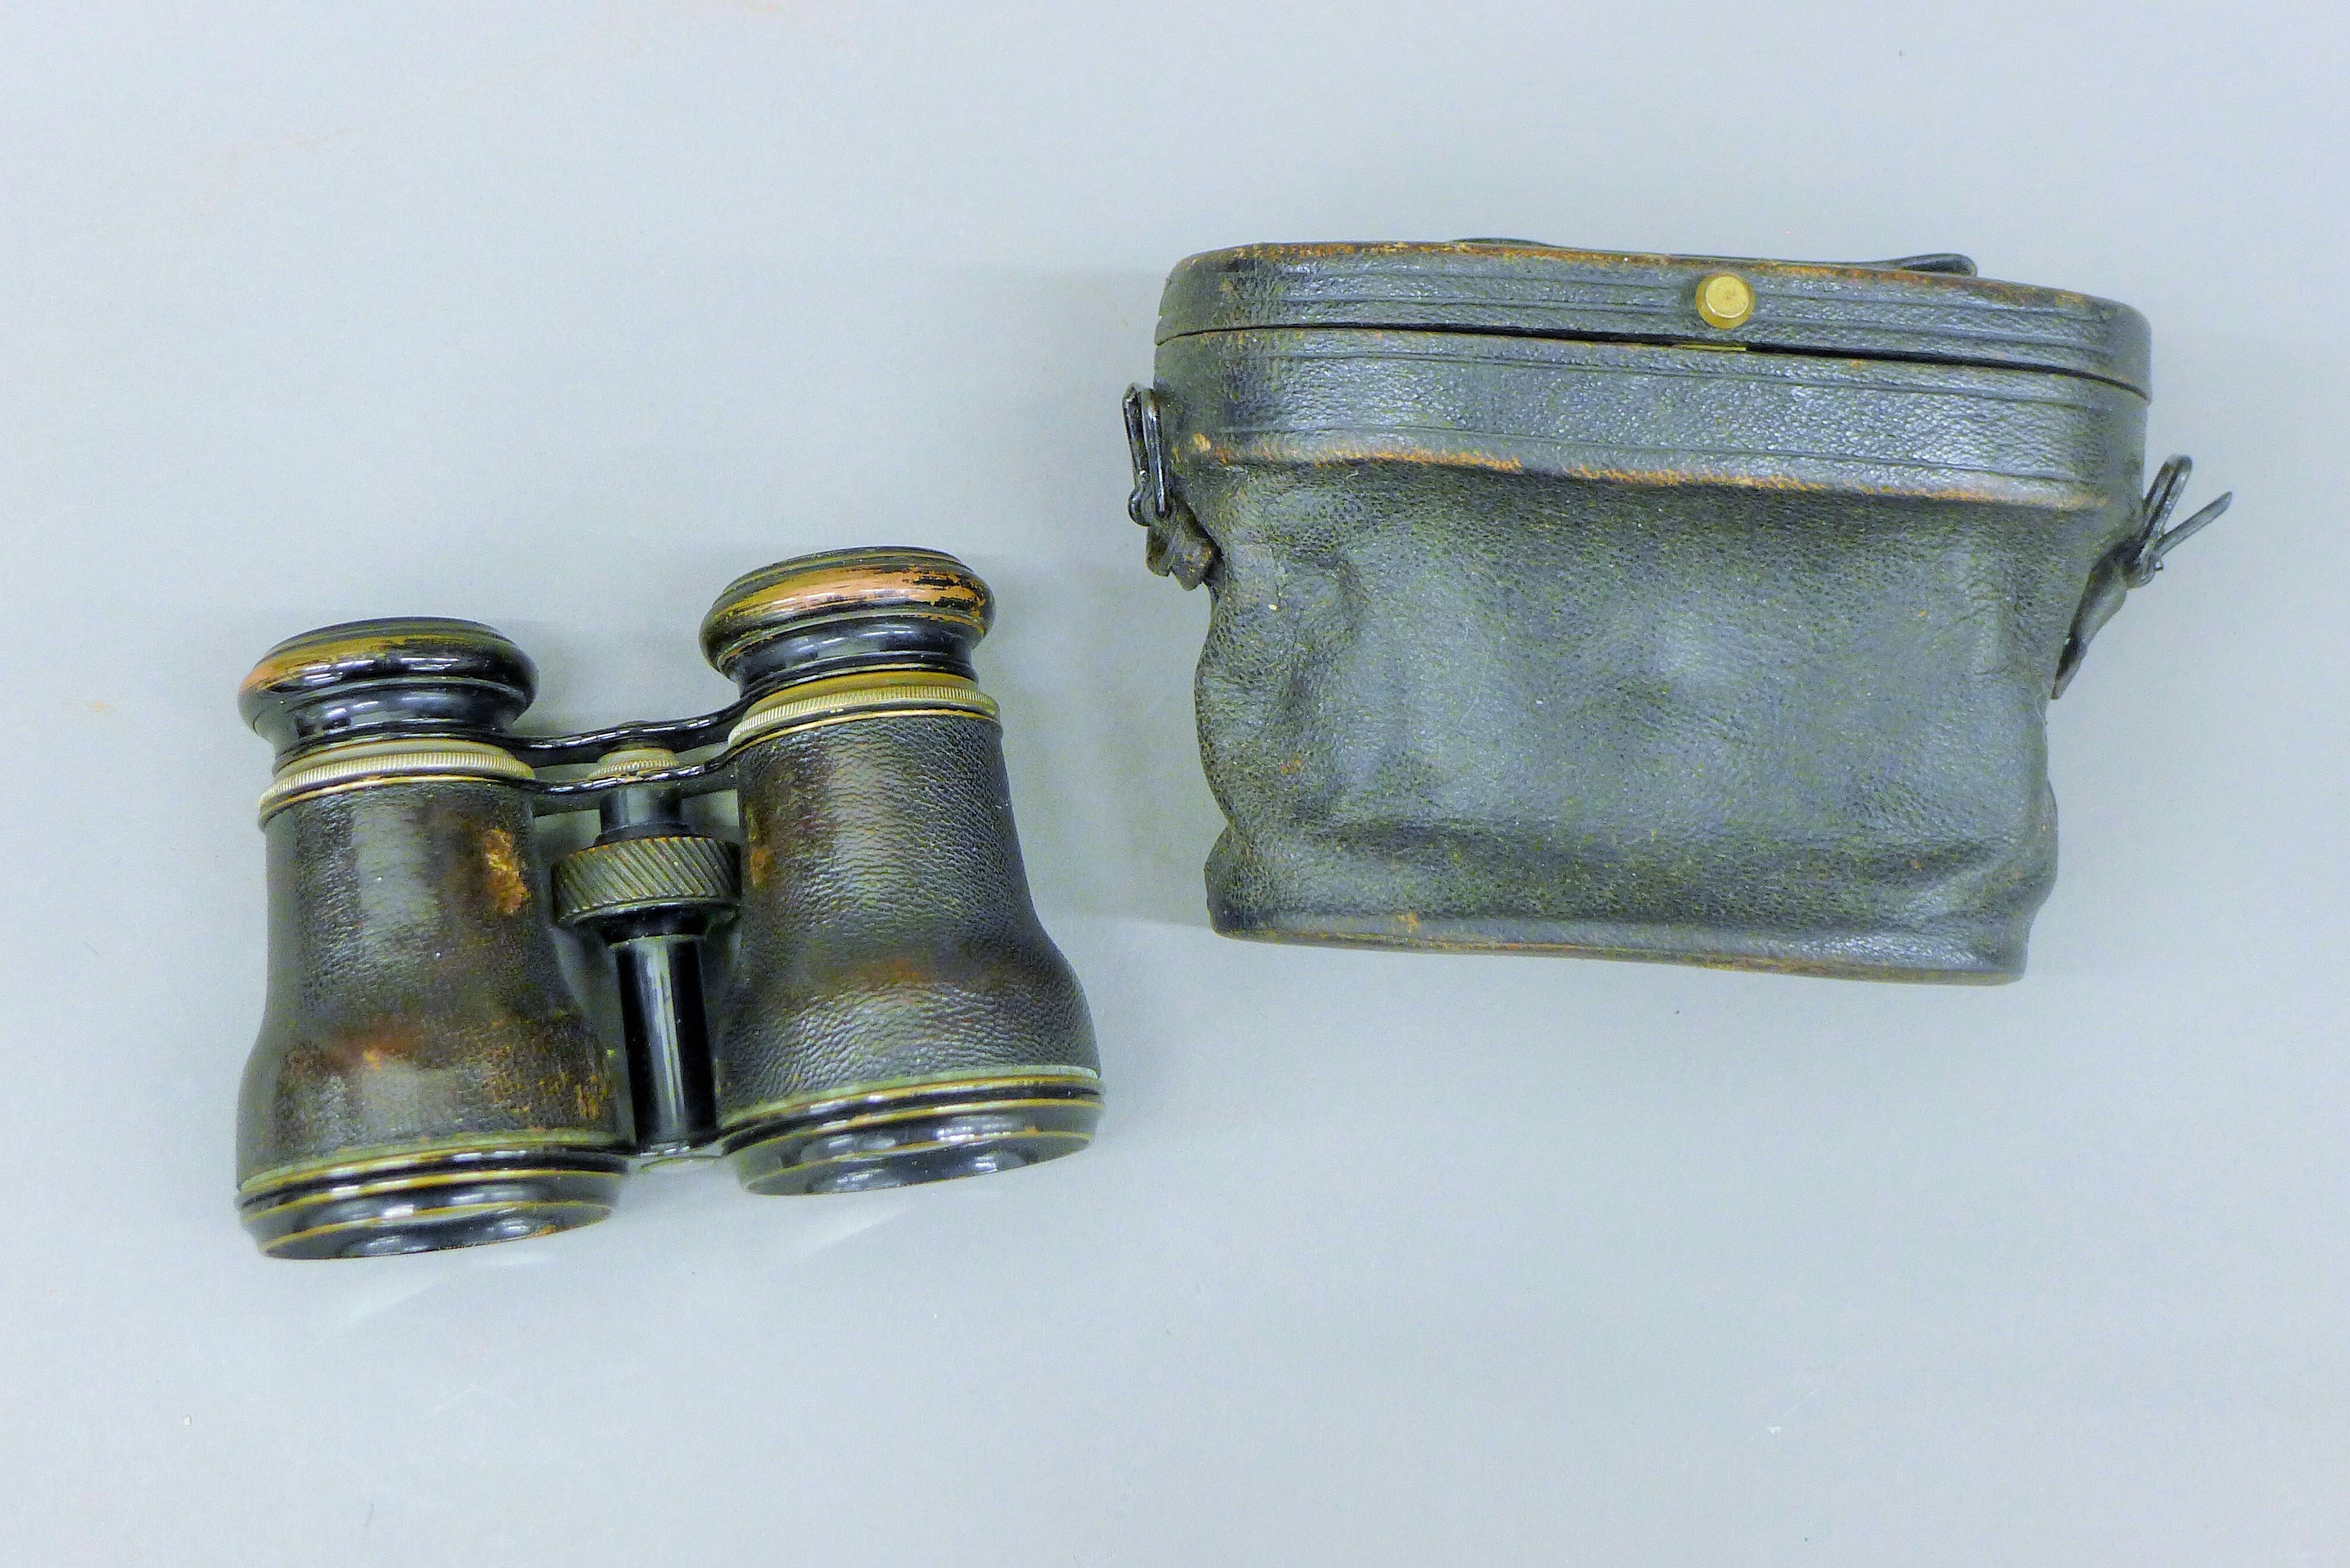 A pair of field glasses with inset compass, case. 13.5 cm wide overall.